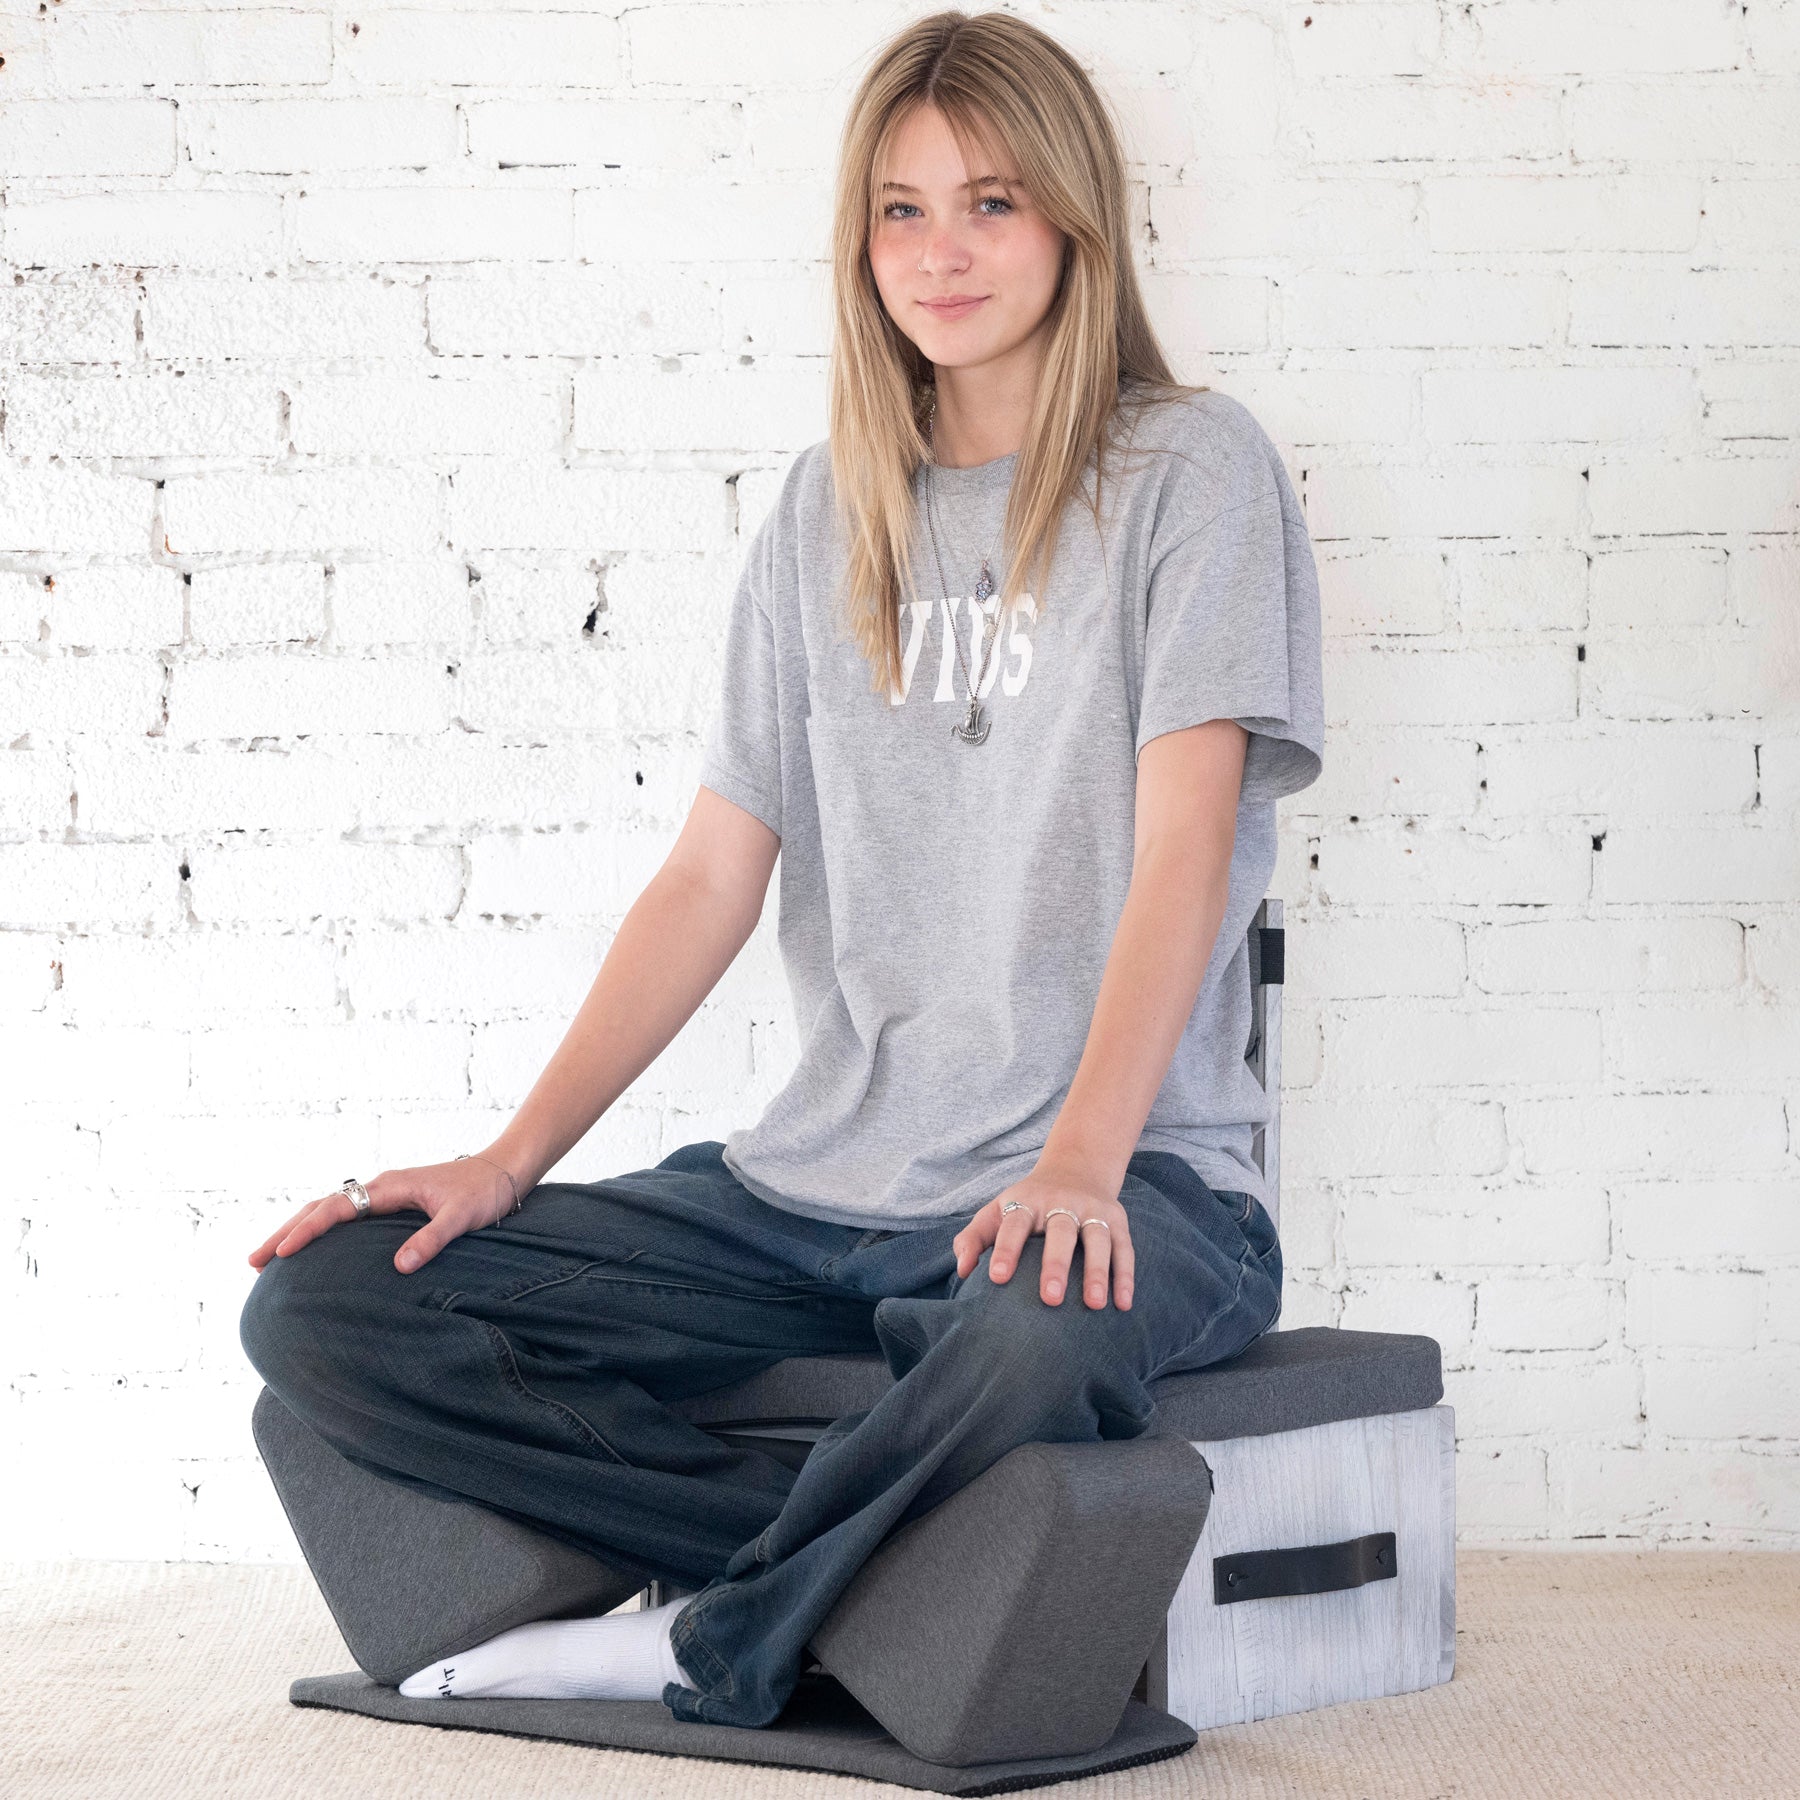 Ungloo Box - Portable Meditation Chair With Back and Hip Support